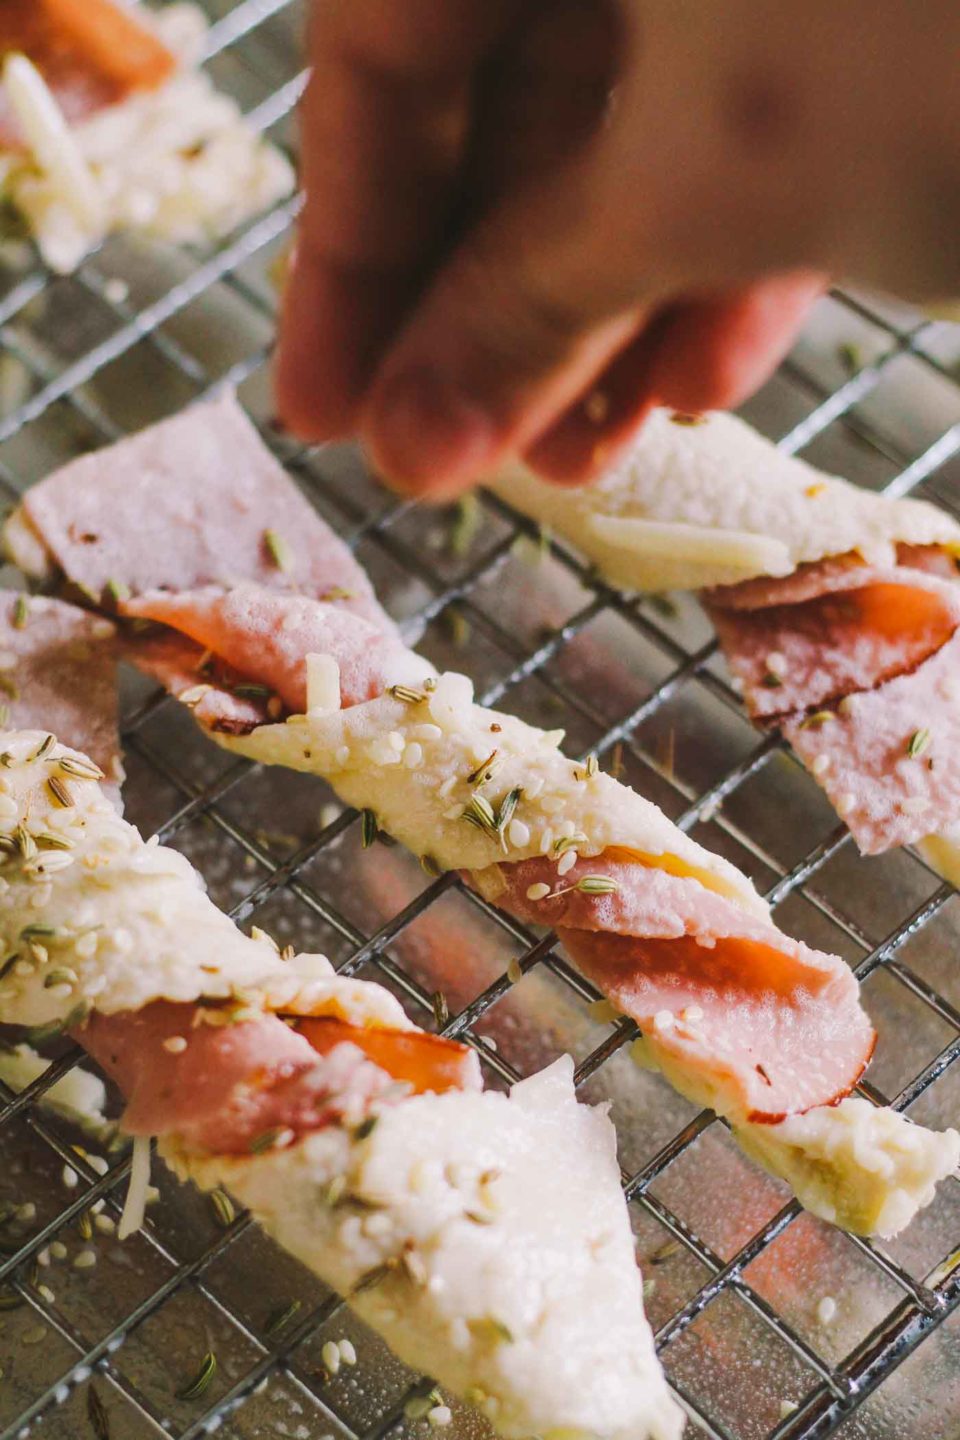 homemade ham & gruyère twists recipe via playswellwithbutter.com | served in bite-sized form, they make a great little snack for an elegant brunch gathering & they're equally delicious when you have friends over for cocktails & appetizers! | brunch ideas, easter ideas, elegant appetizers, easy entertaining |